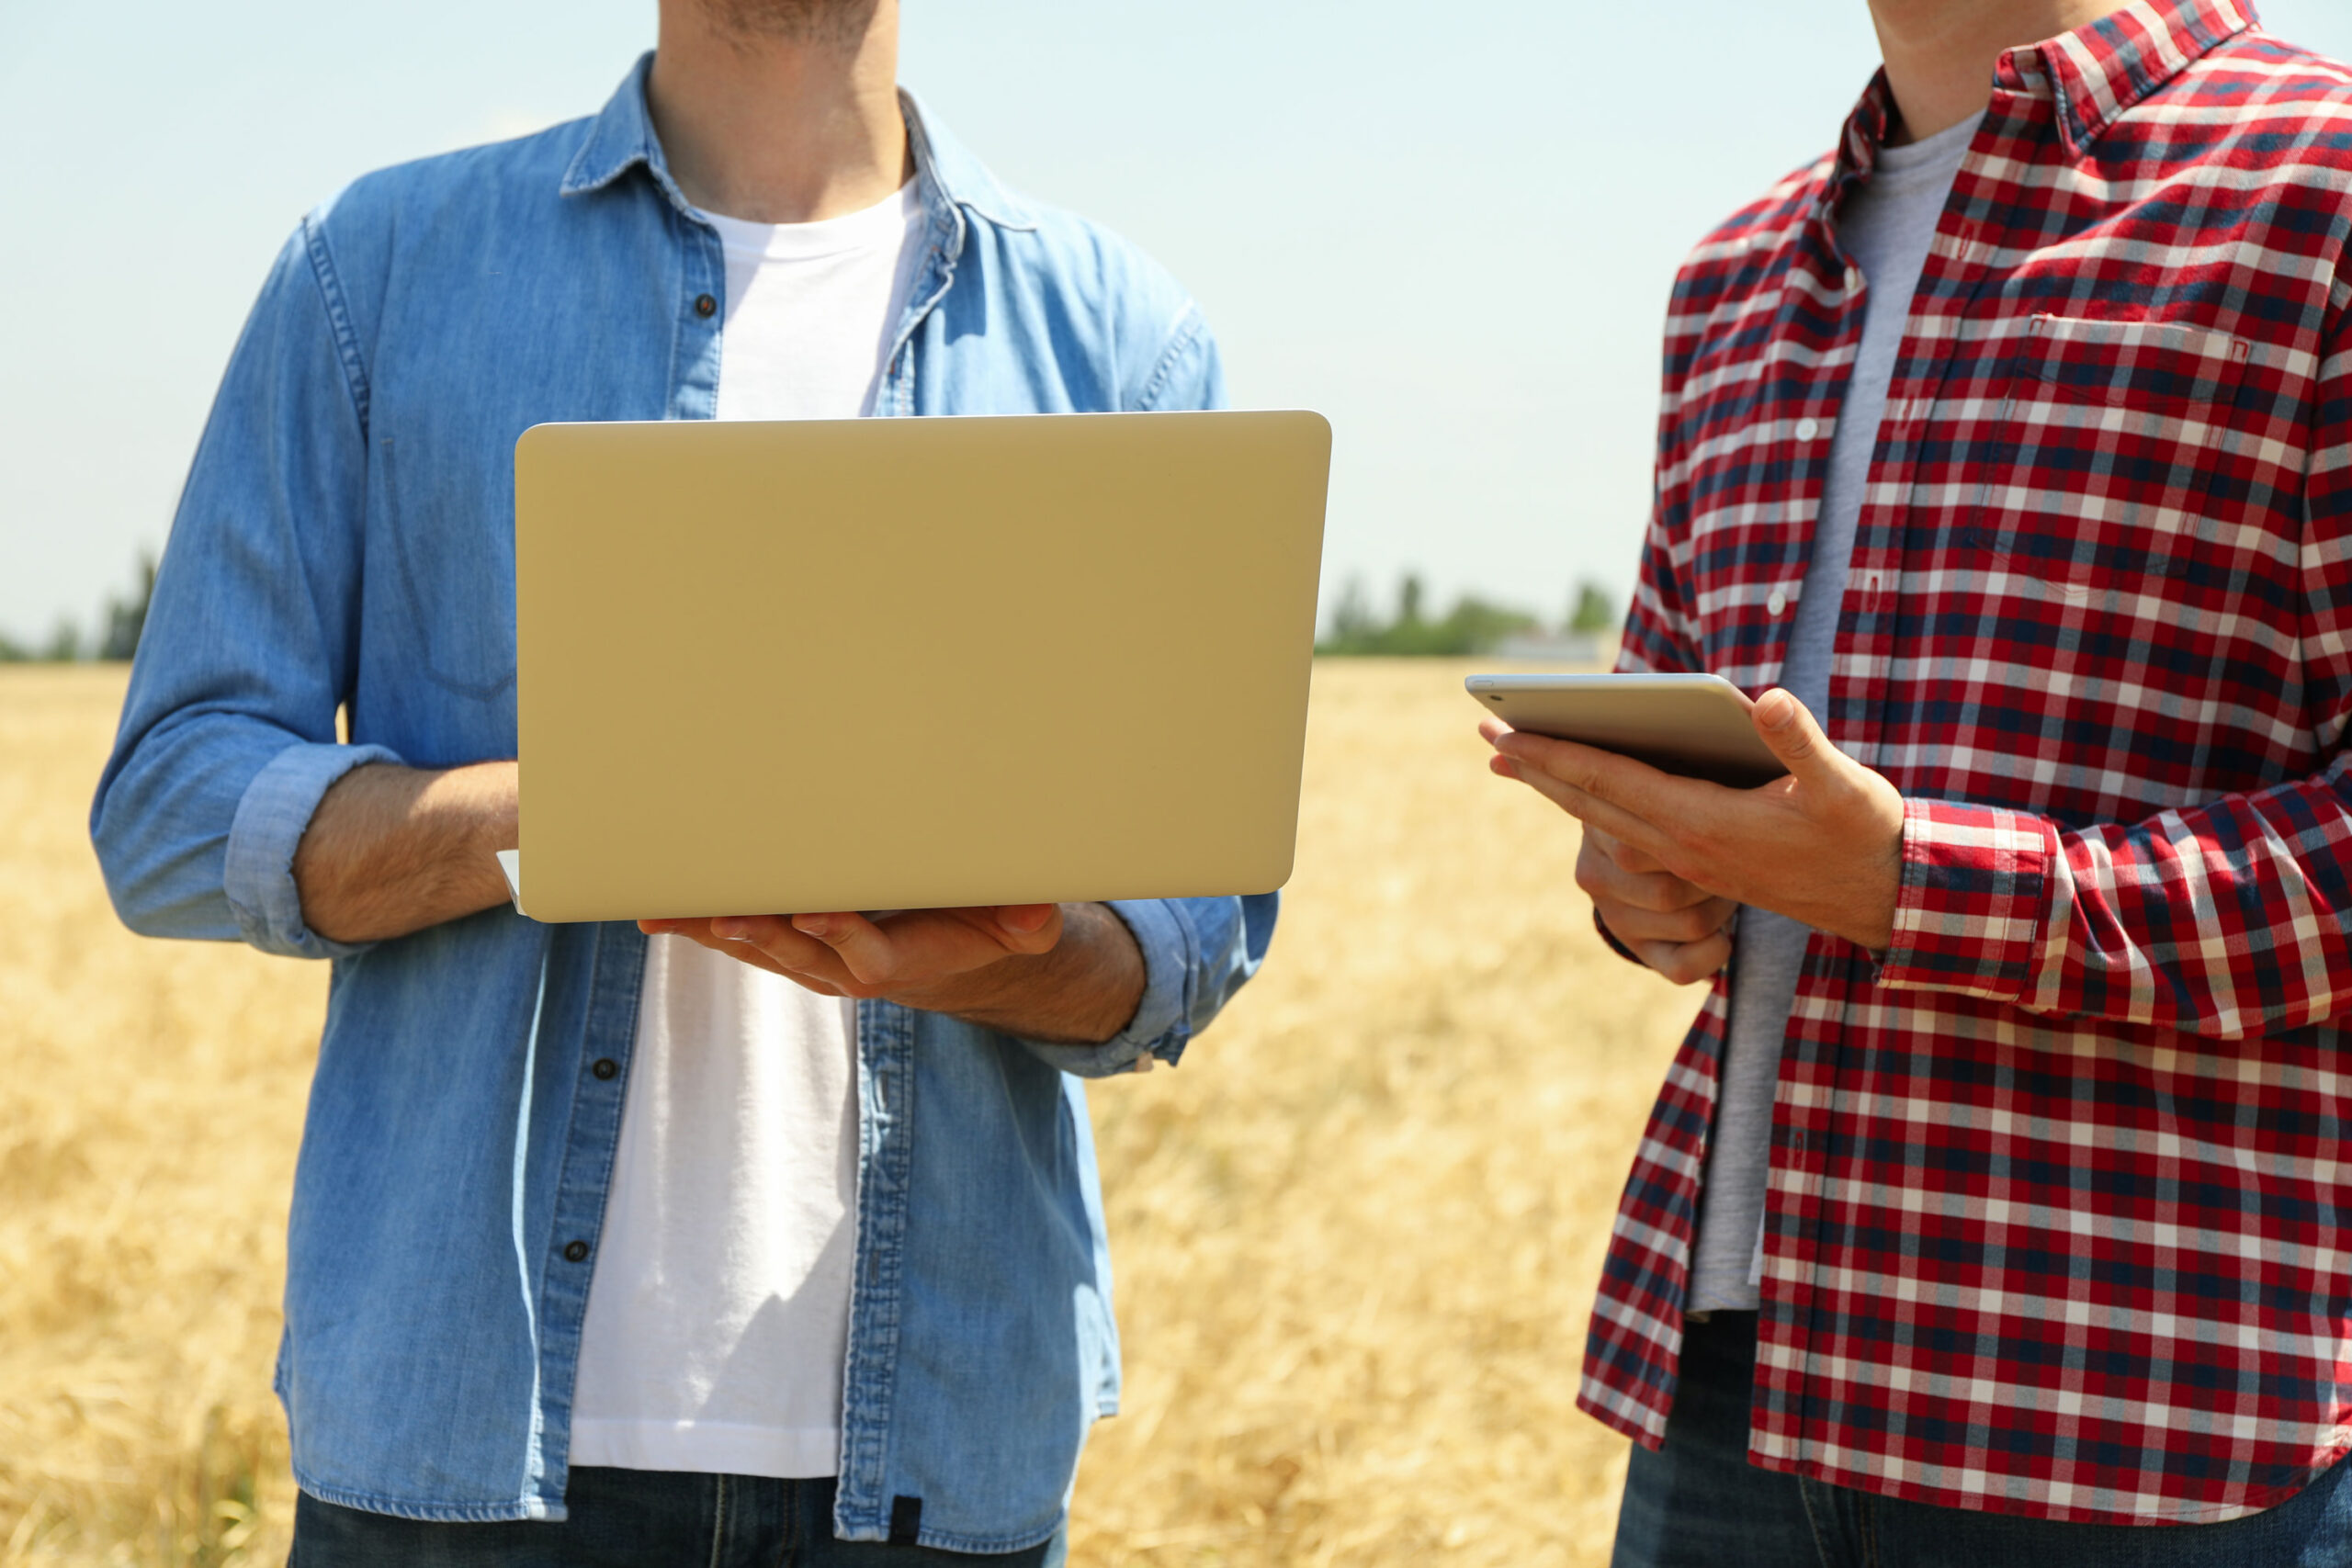 a close up image of two young men in a wheat field looking at a laptop. one man is wearing a blue jean jacket with a white shirt. the other man is wearing a flannel shirt and looking at his mobile phone.